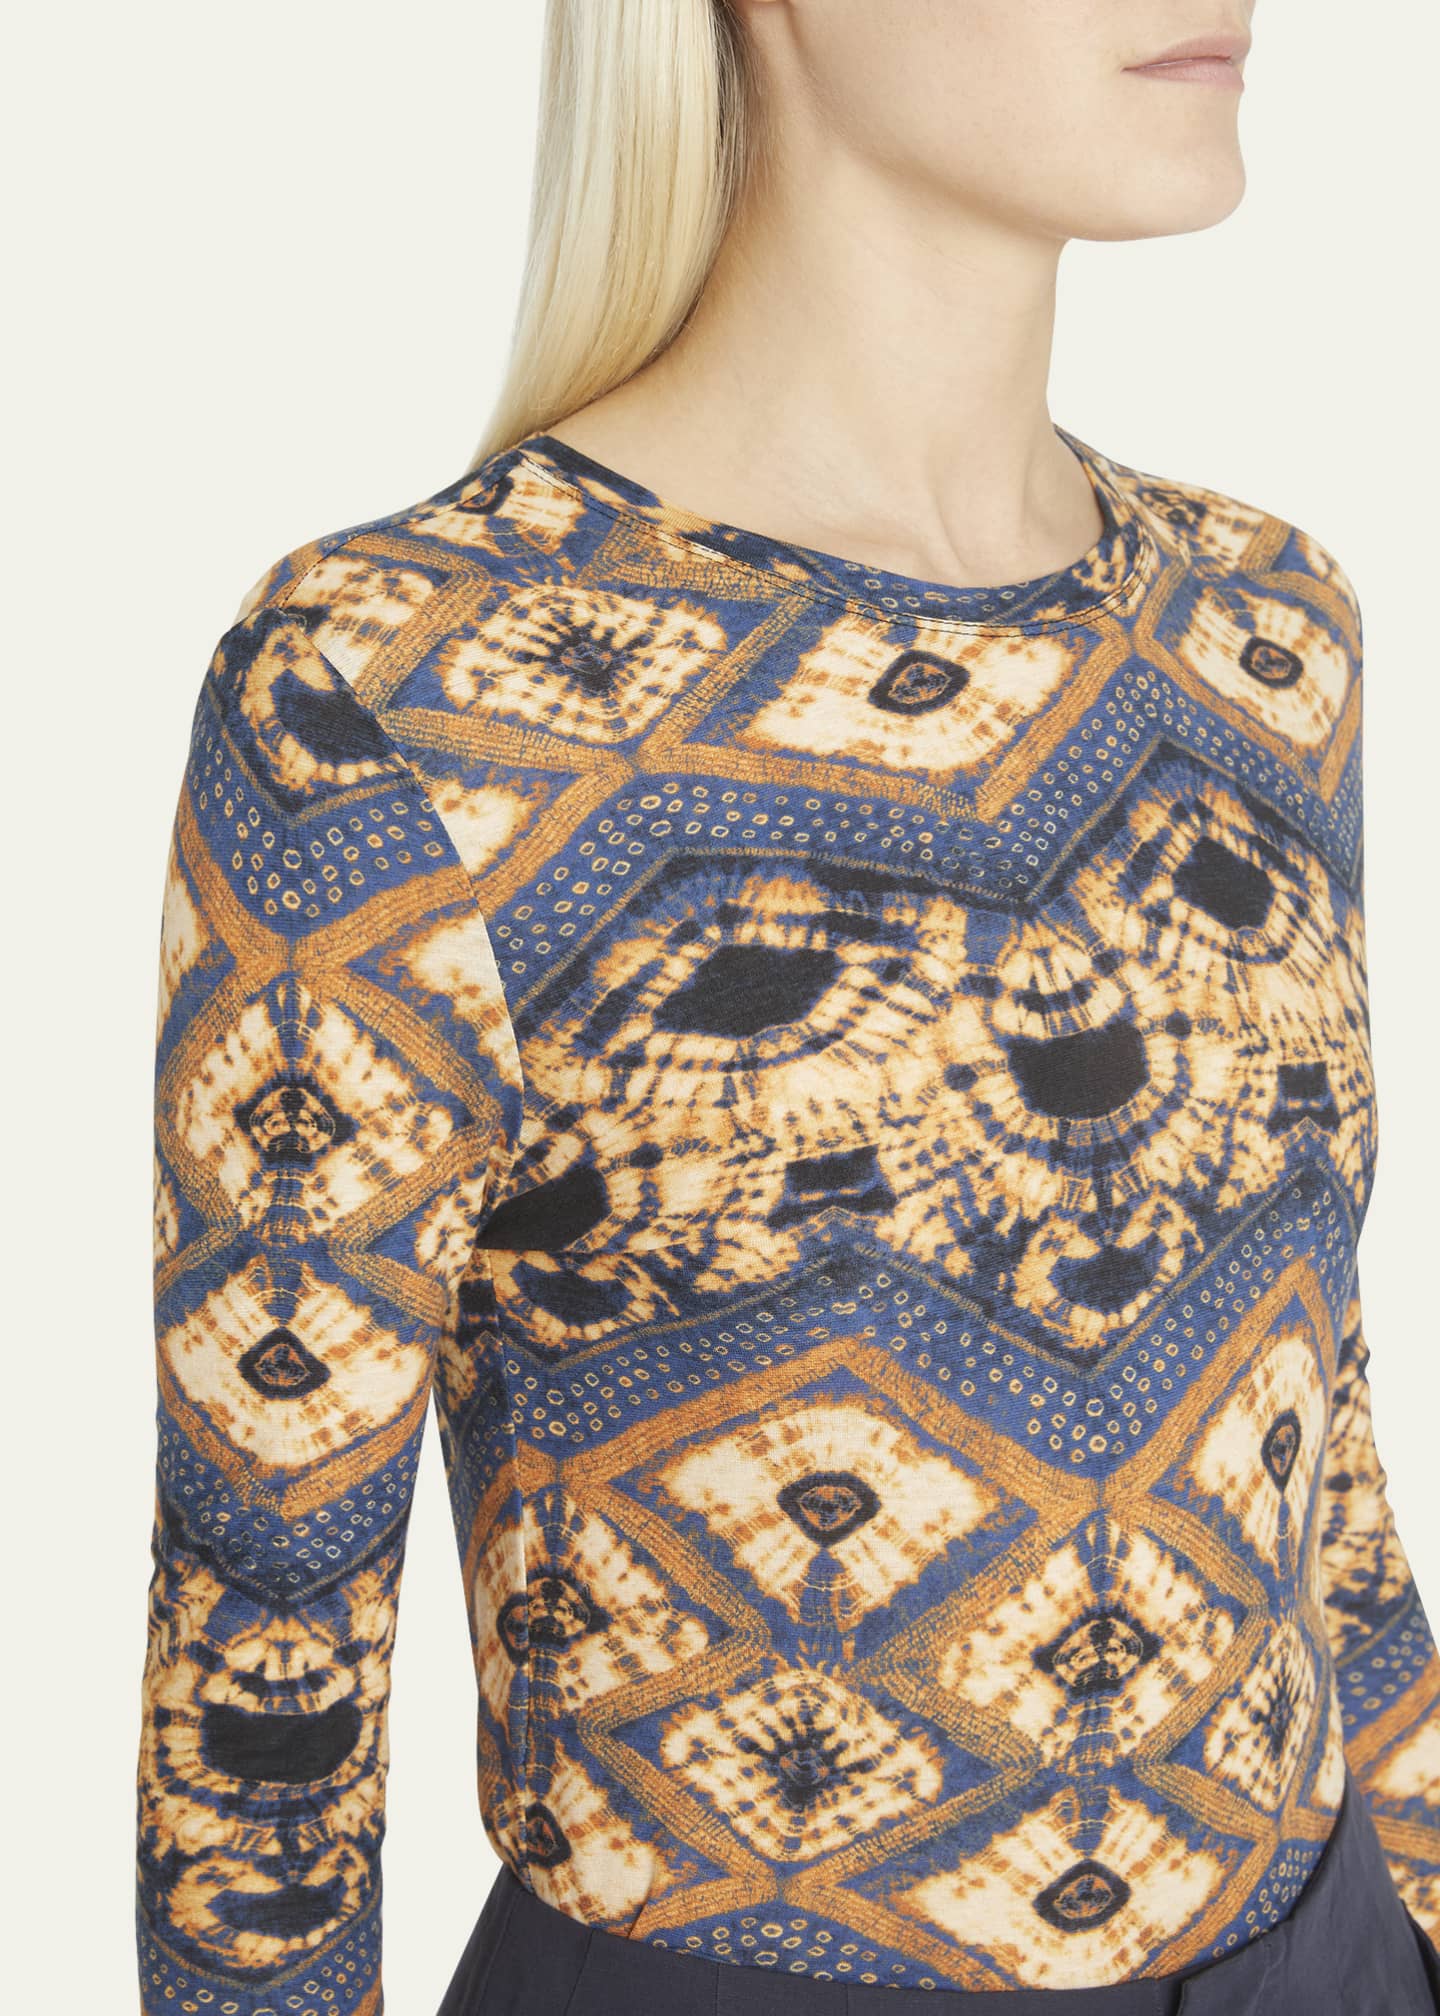 Ulla Johnson Eve Long-Sleeve Fitted Tissue Crepe Jersey Top - Bergdorf ...